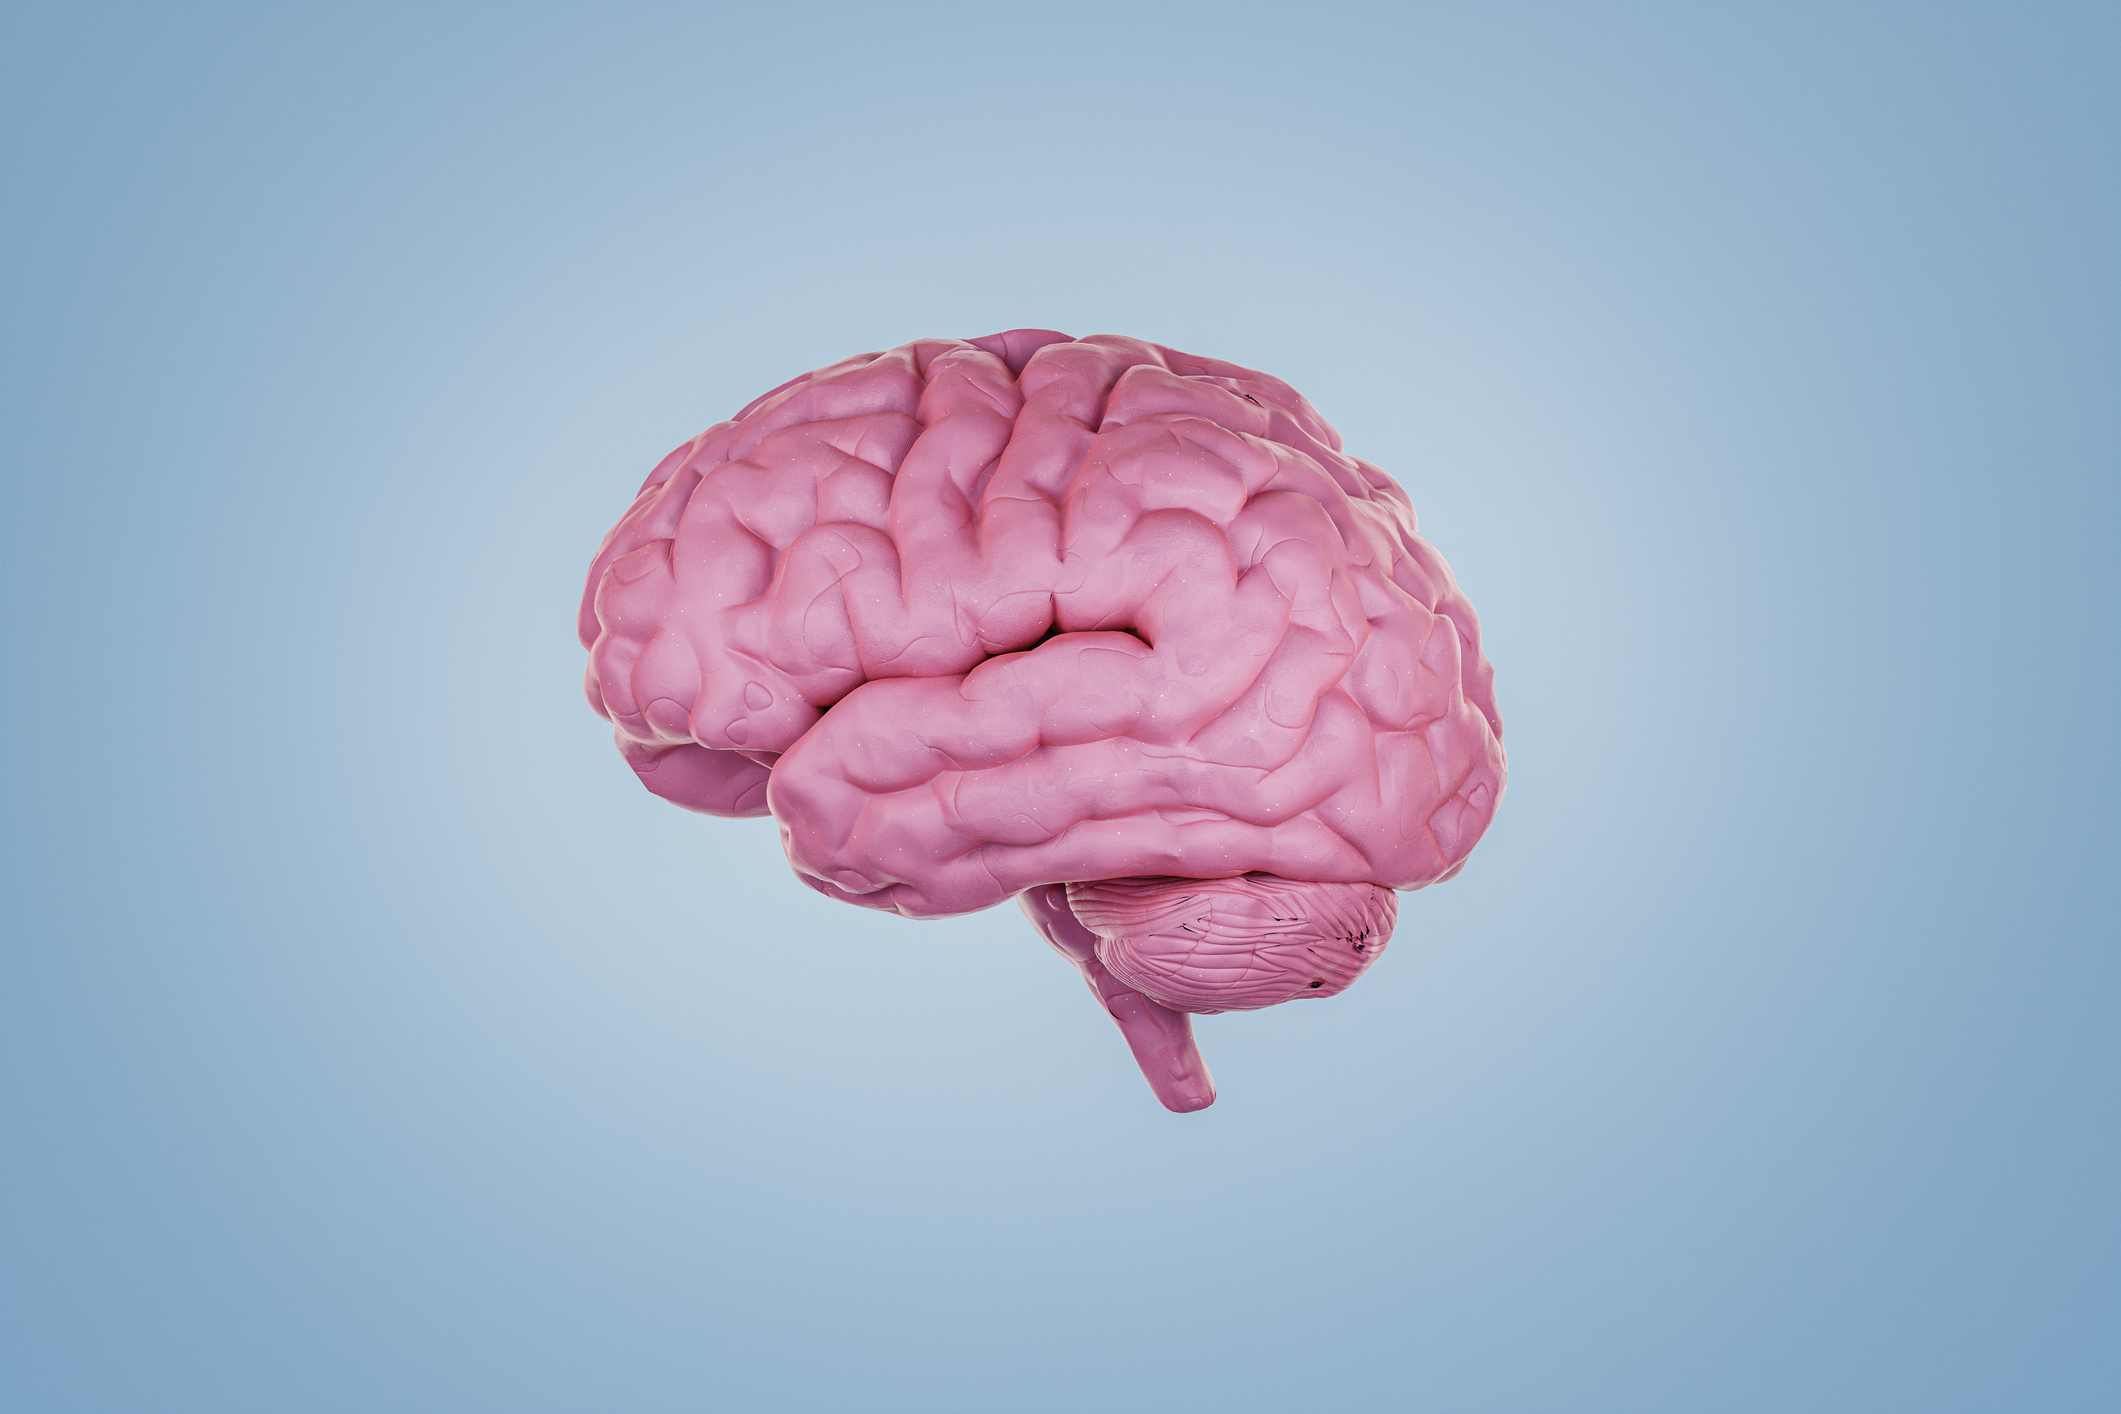 digitally generated computer graphic illustration image of a human brain with a modeling clay texture